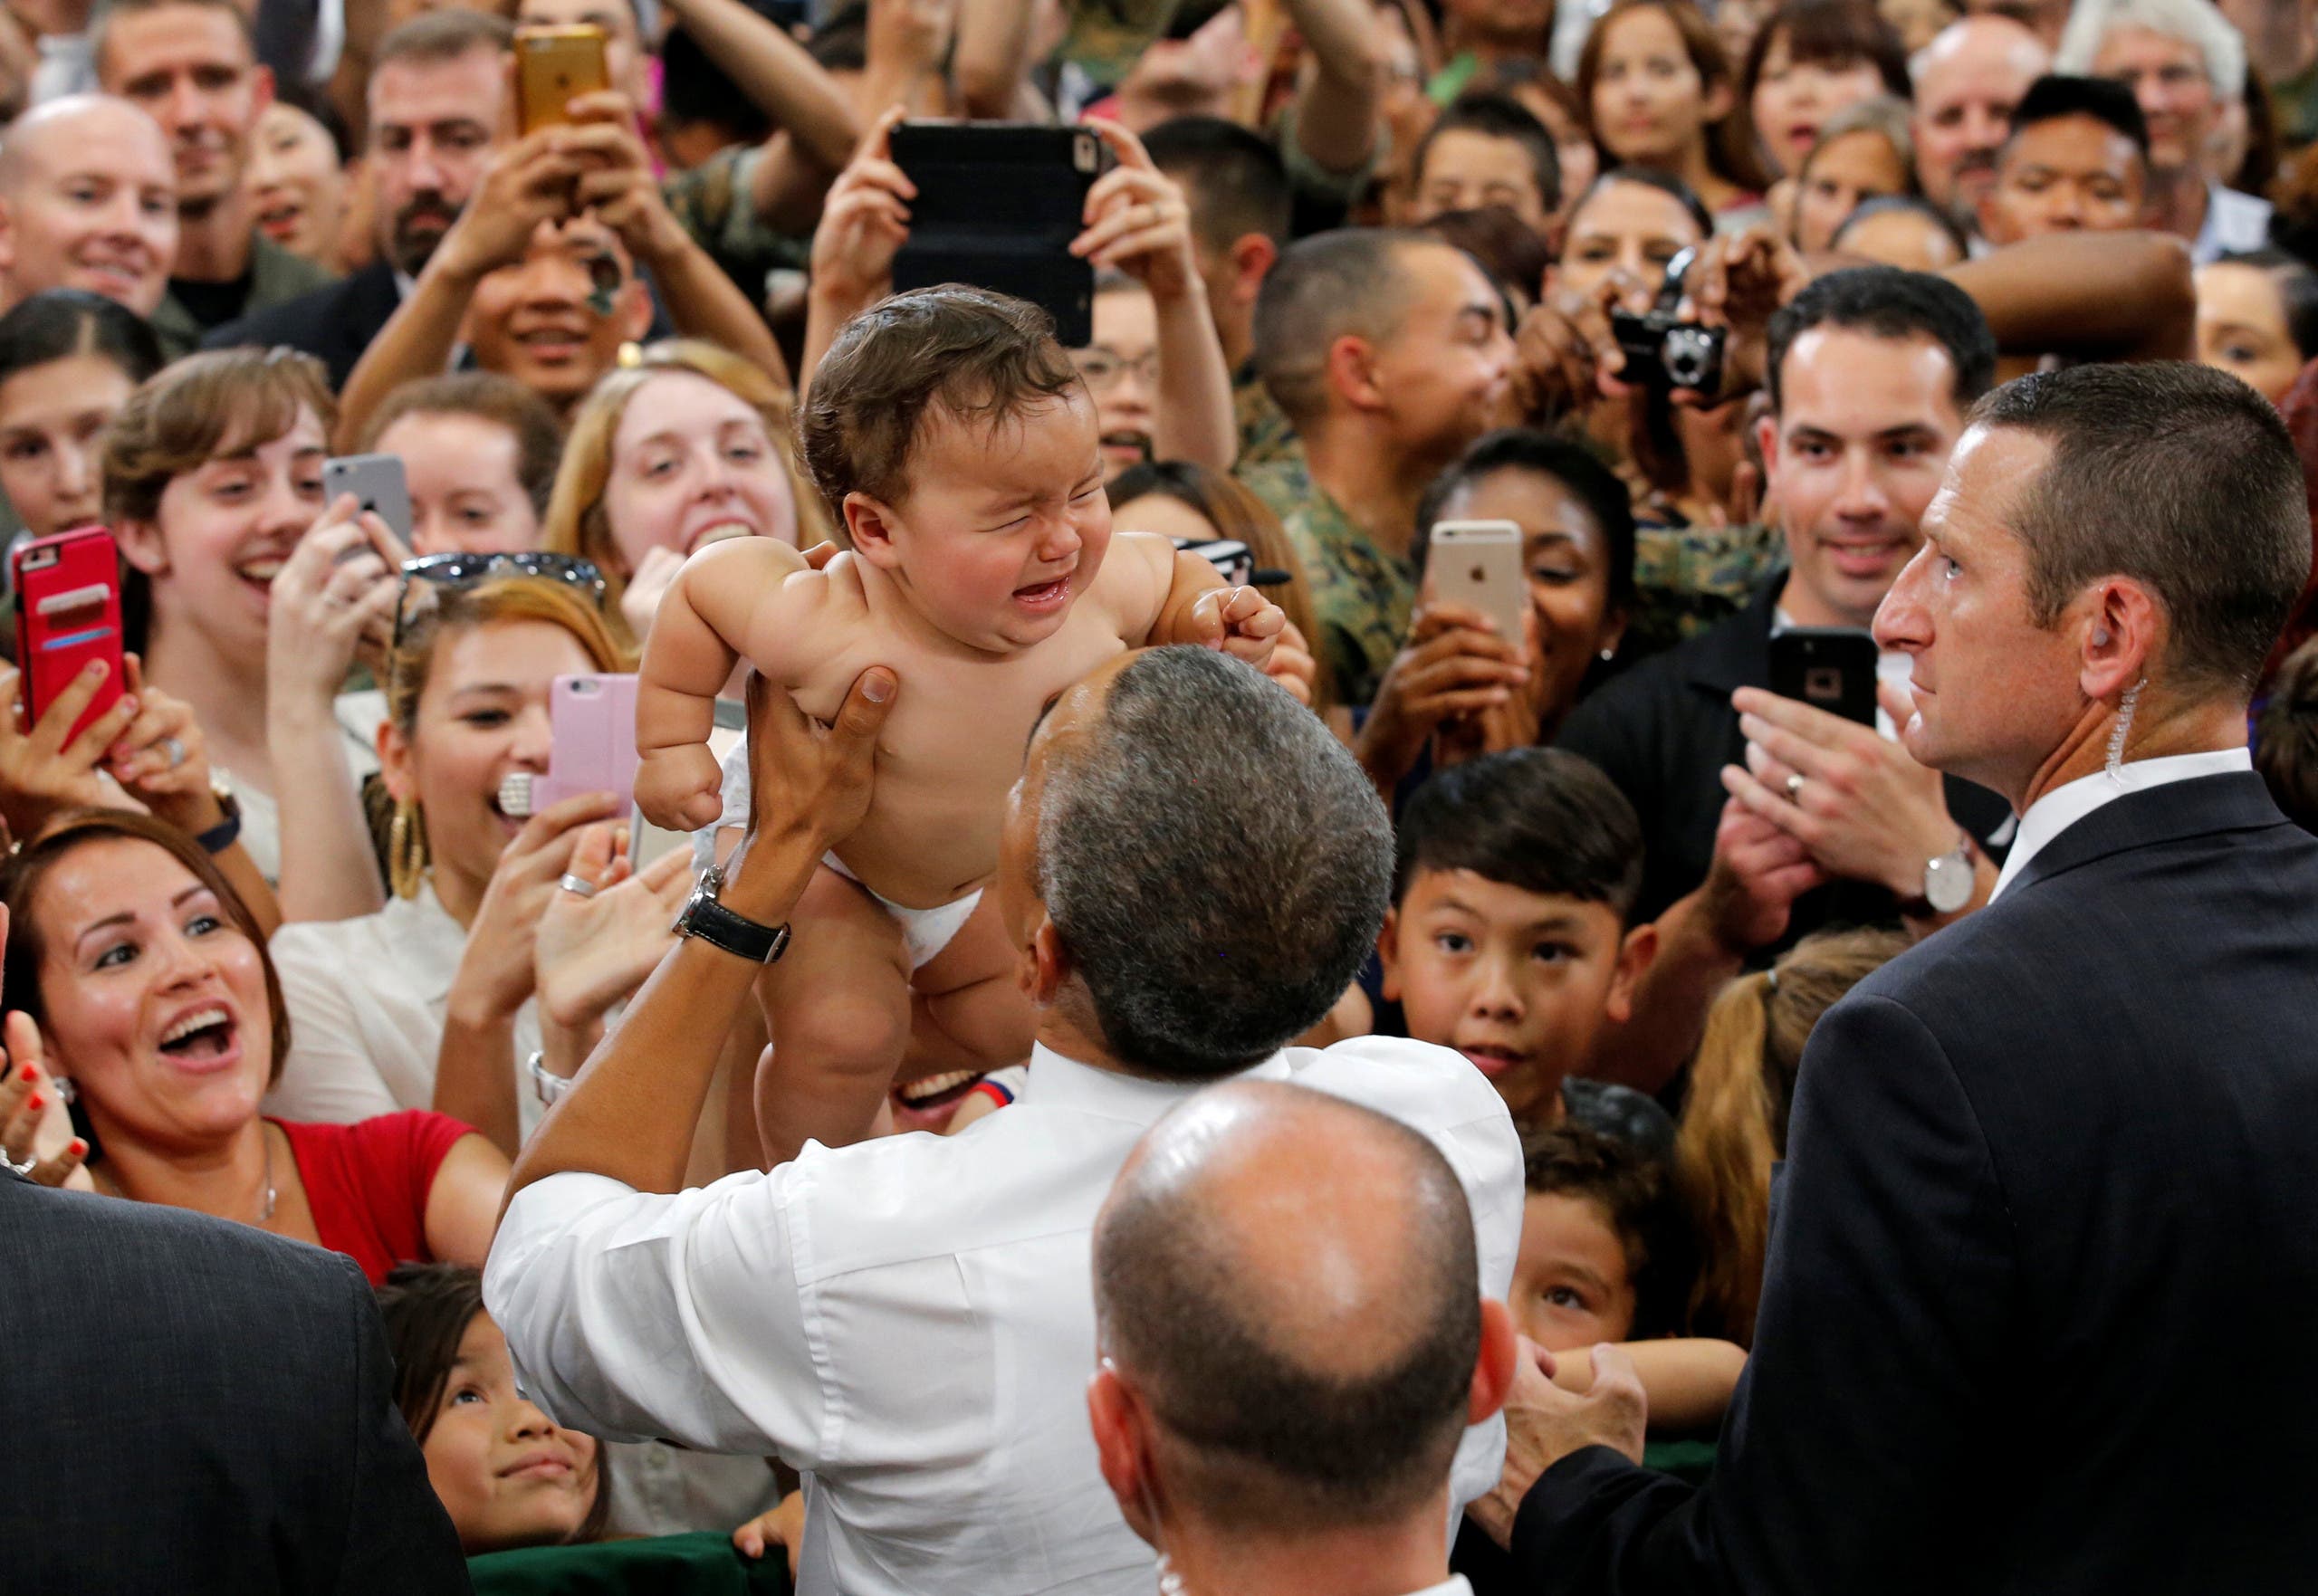 Obama proves once again he can make any baby stop crying